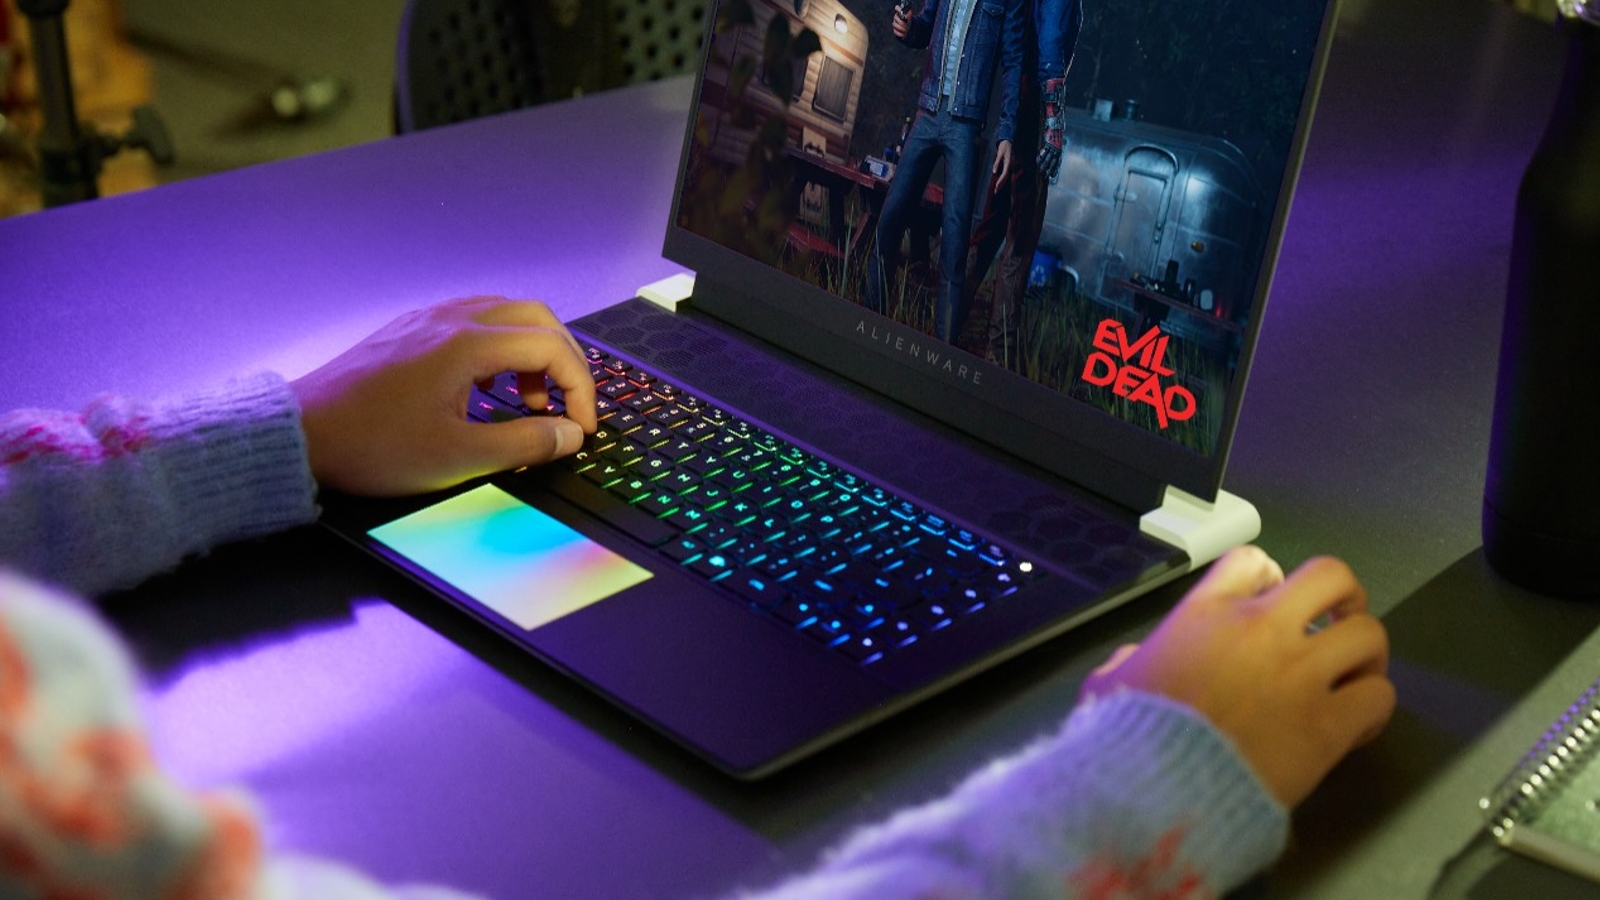 Dell launches Alienware x16 R2 gaming laptop with up to RTX 4090 mobile graphics